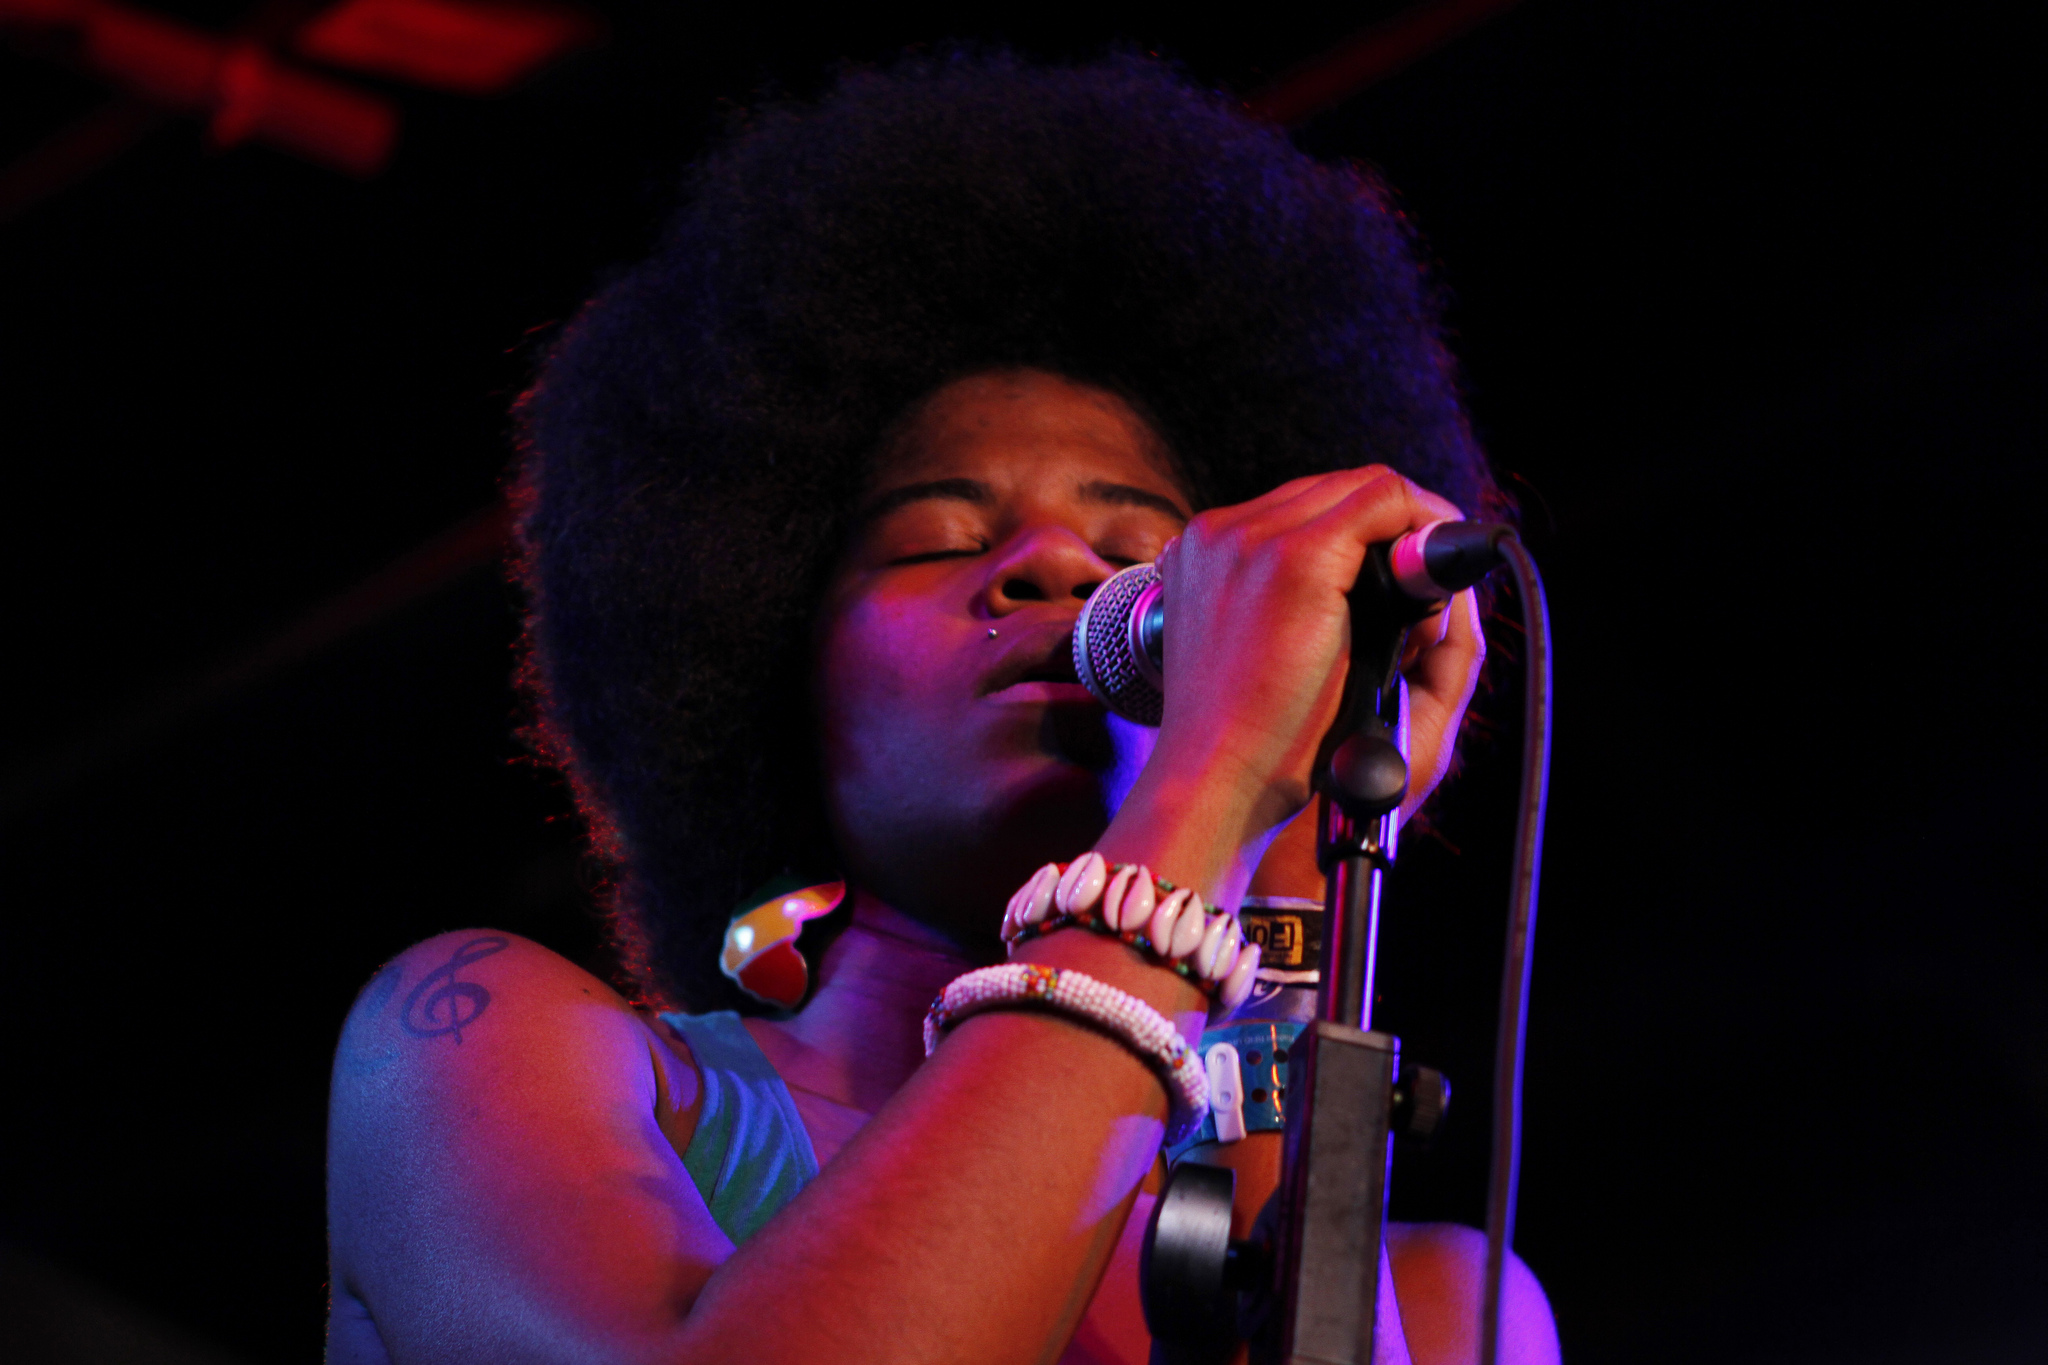 THEESatisfaction performs at the Sub Pop showcast at Red 7 during South By Southwest in Austin, Texas on March 16, 2012.